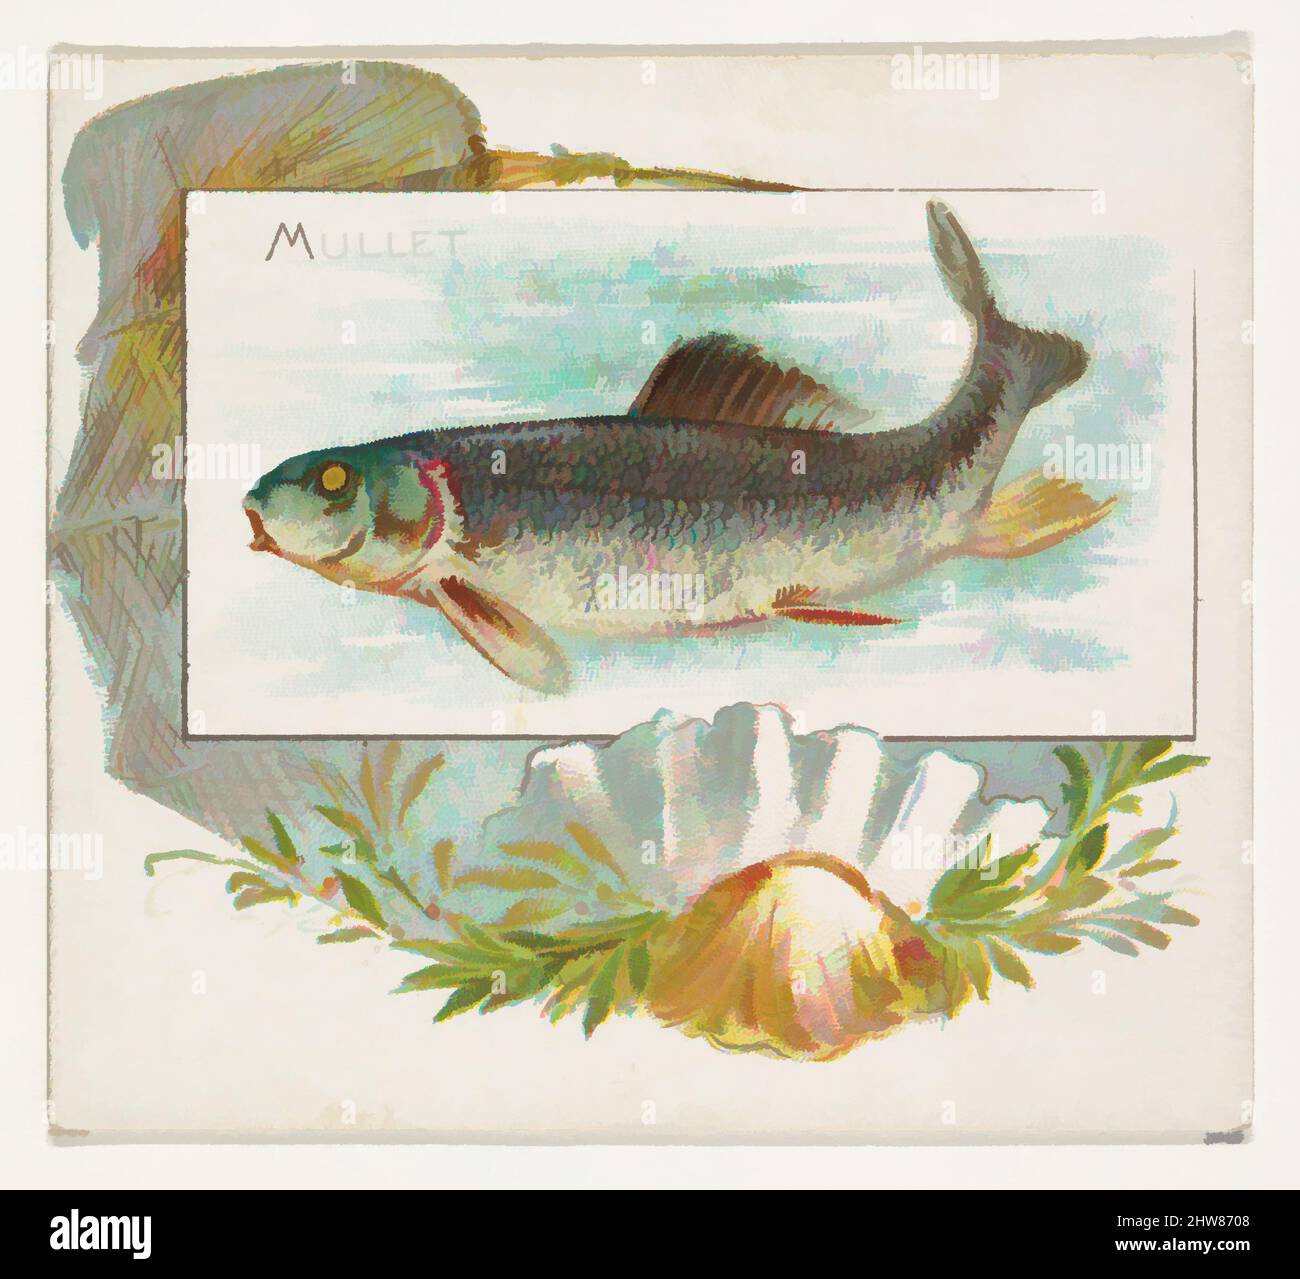 Art inspired by Mullet, from Fish from American Waters series (N39) for Allen & Ginter Cigarettes, 1889, Commercial color lithograph, Sheet: 2 7/8 x 3 1/4 in. (7.3 x 8.3 cm), Trade cards from the 'Fish from American Waters' series (N39), issued in 1889 in a set of 50 cards to promote, Classic works modernized by Artotop with a splash of modernity. Shapes, color and value, eye-catching visual impact on art. Emotions through freedom of artworks in a contemporary way. A timeless message pursuing a wildly creative new direction. Artists turning to the digital medium and creating the Artotop NFT Stock Photo